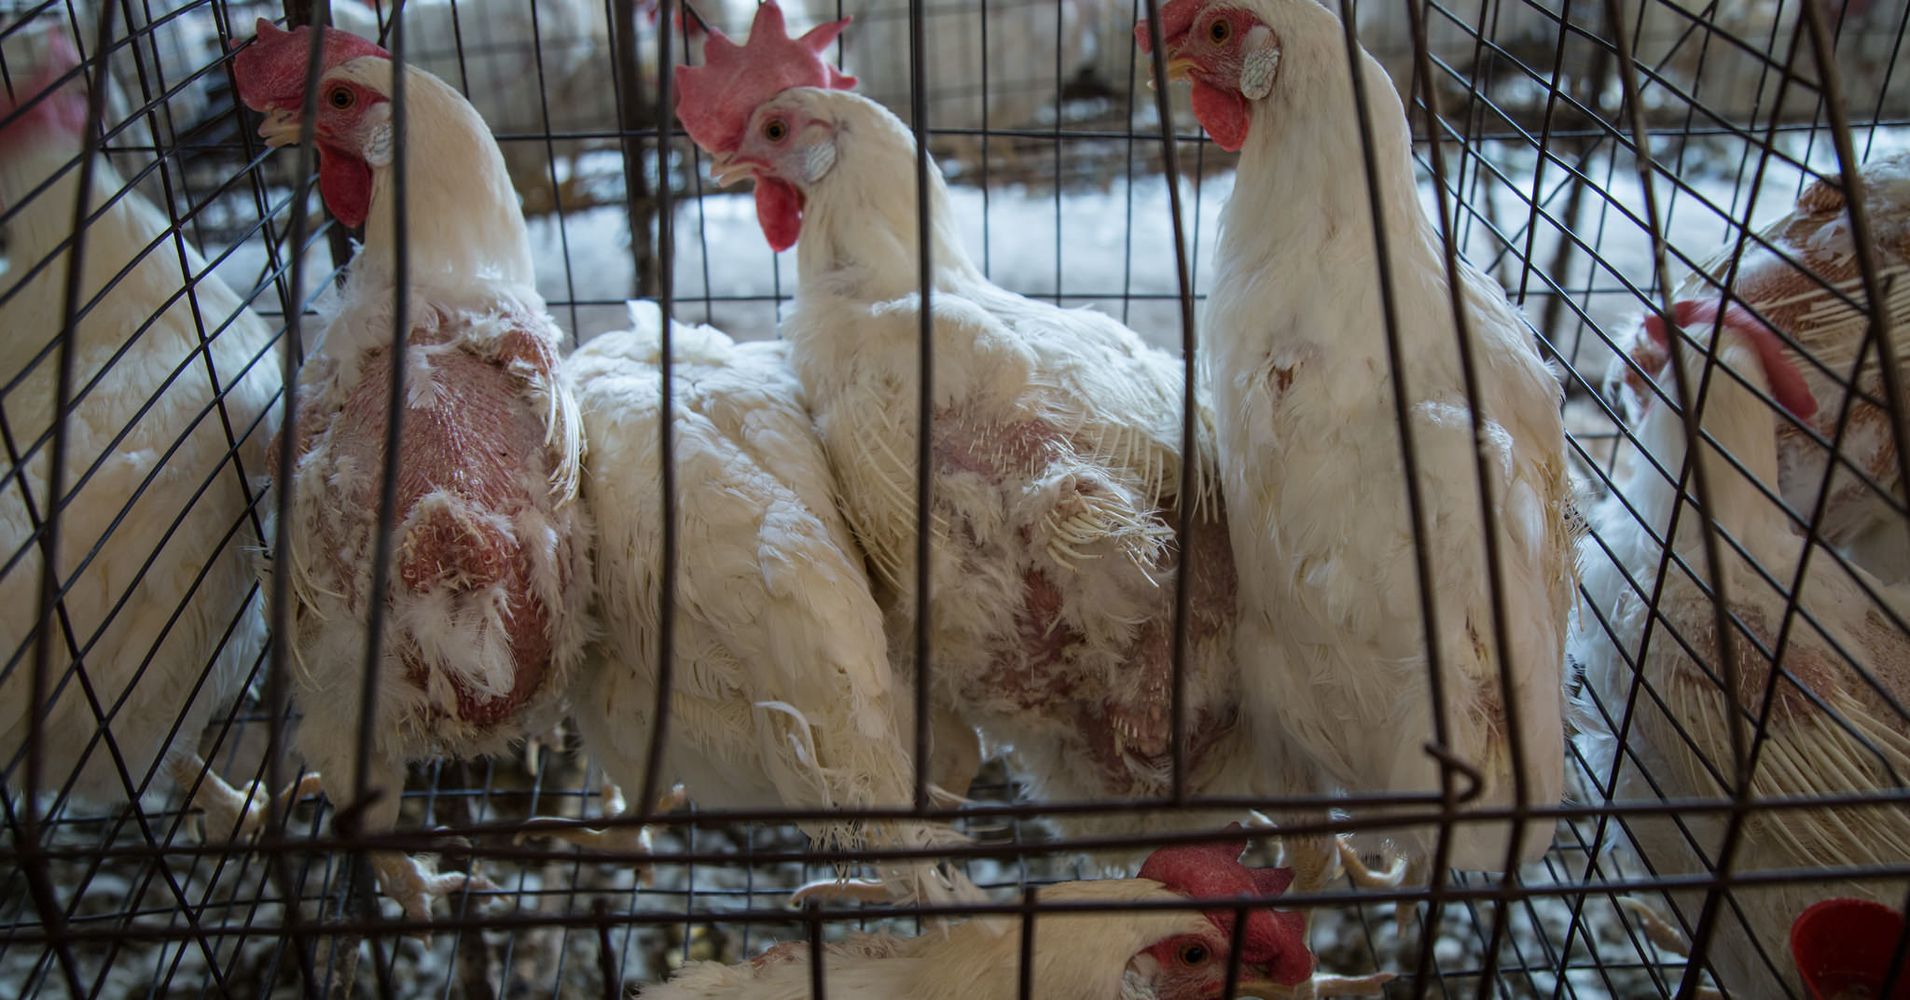 Grisly Undercover Video Shows Chickens Being Starved To Produce More